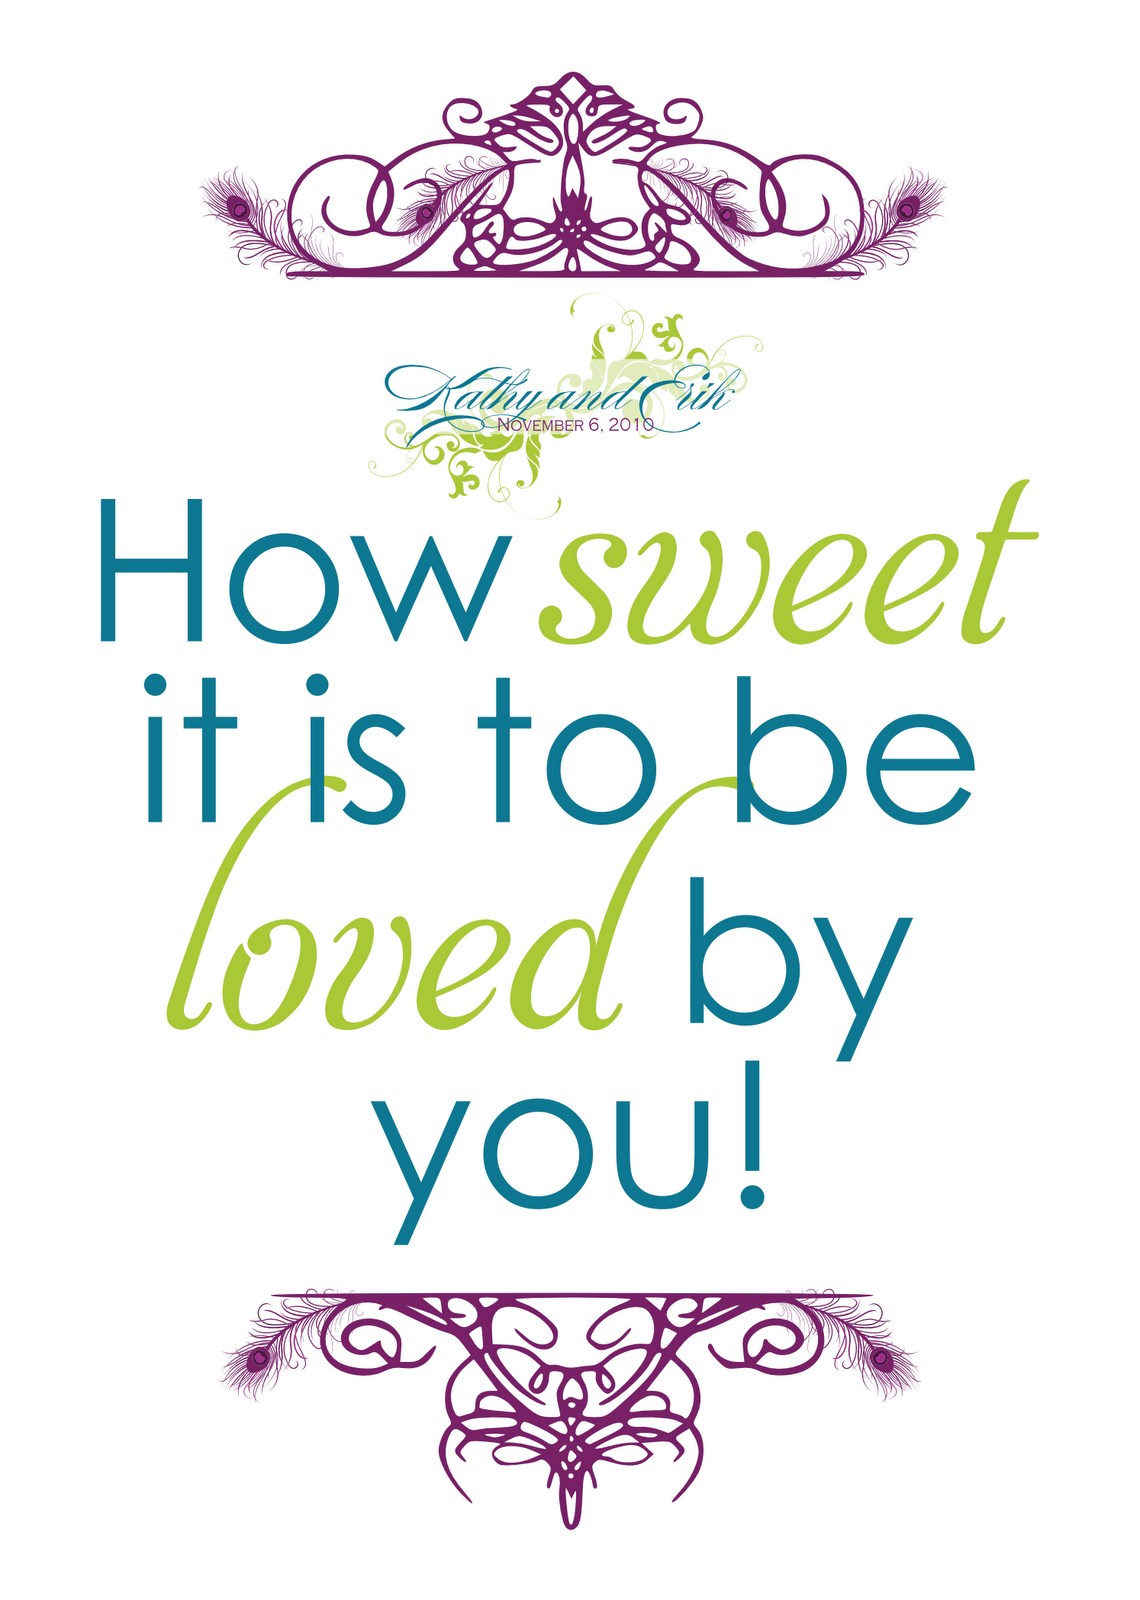 Candy Buffet Signs Templates